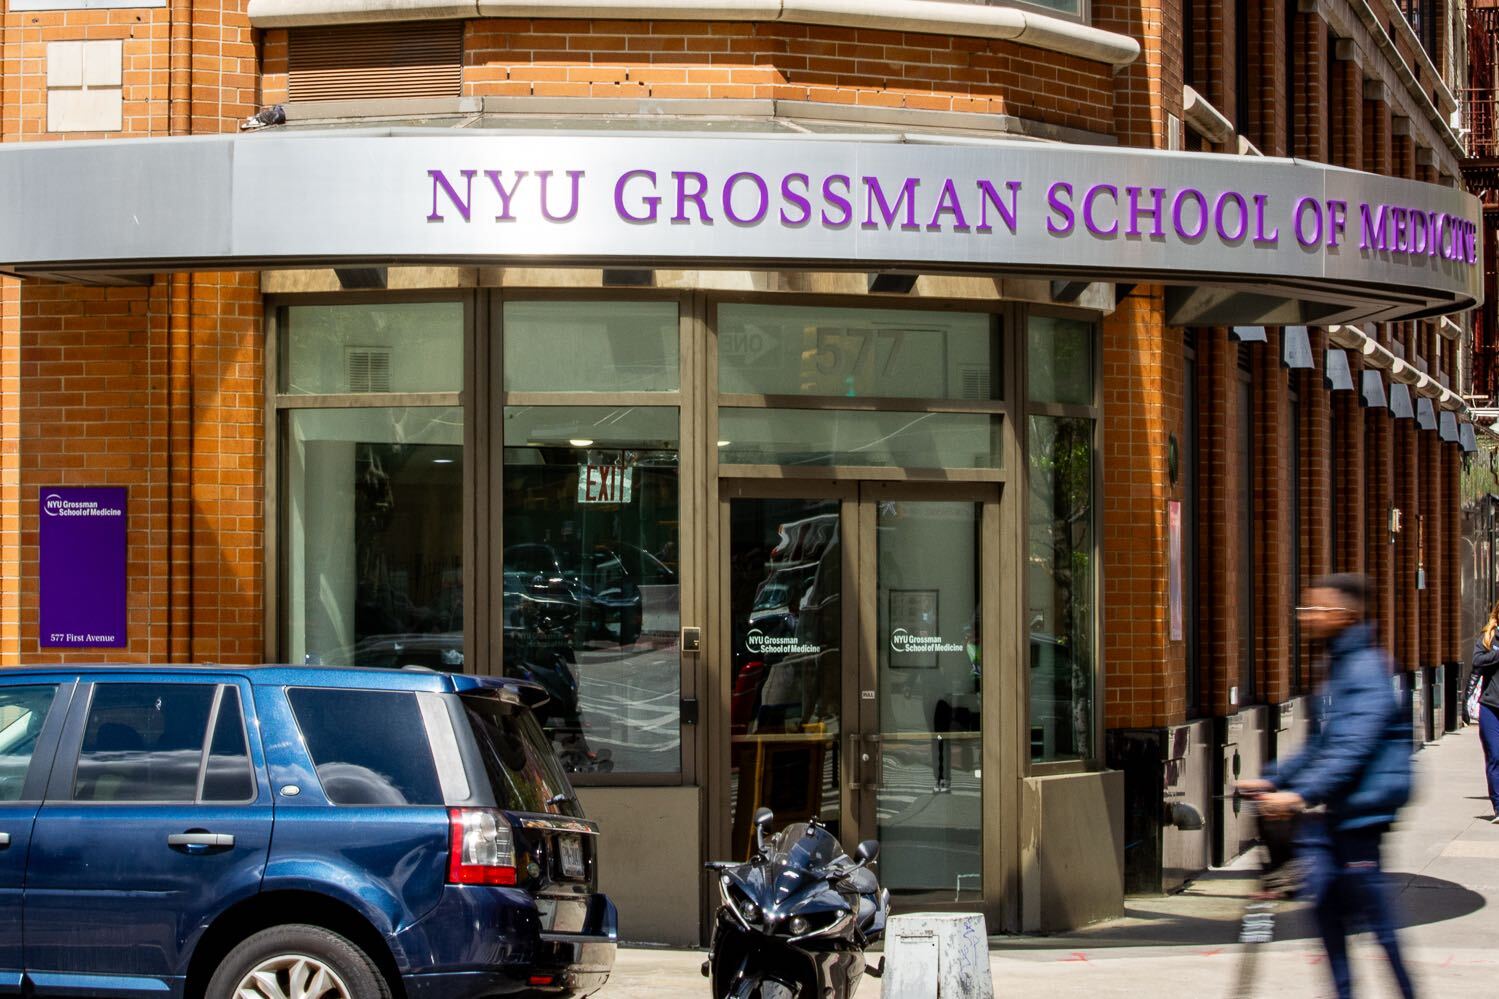 The entrance to a building at a street corner. The signage indicates that the building is N.Y.U.’s Grossman School of Medicine.